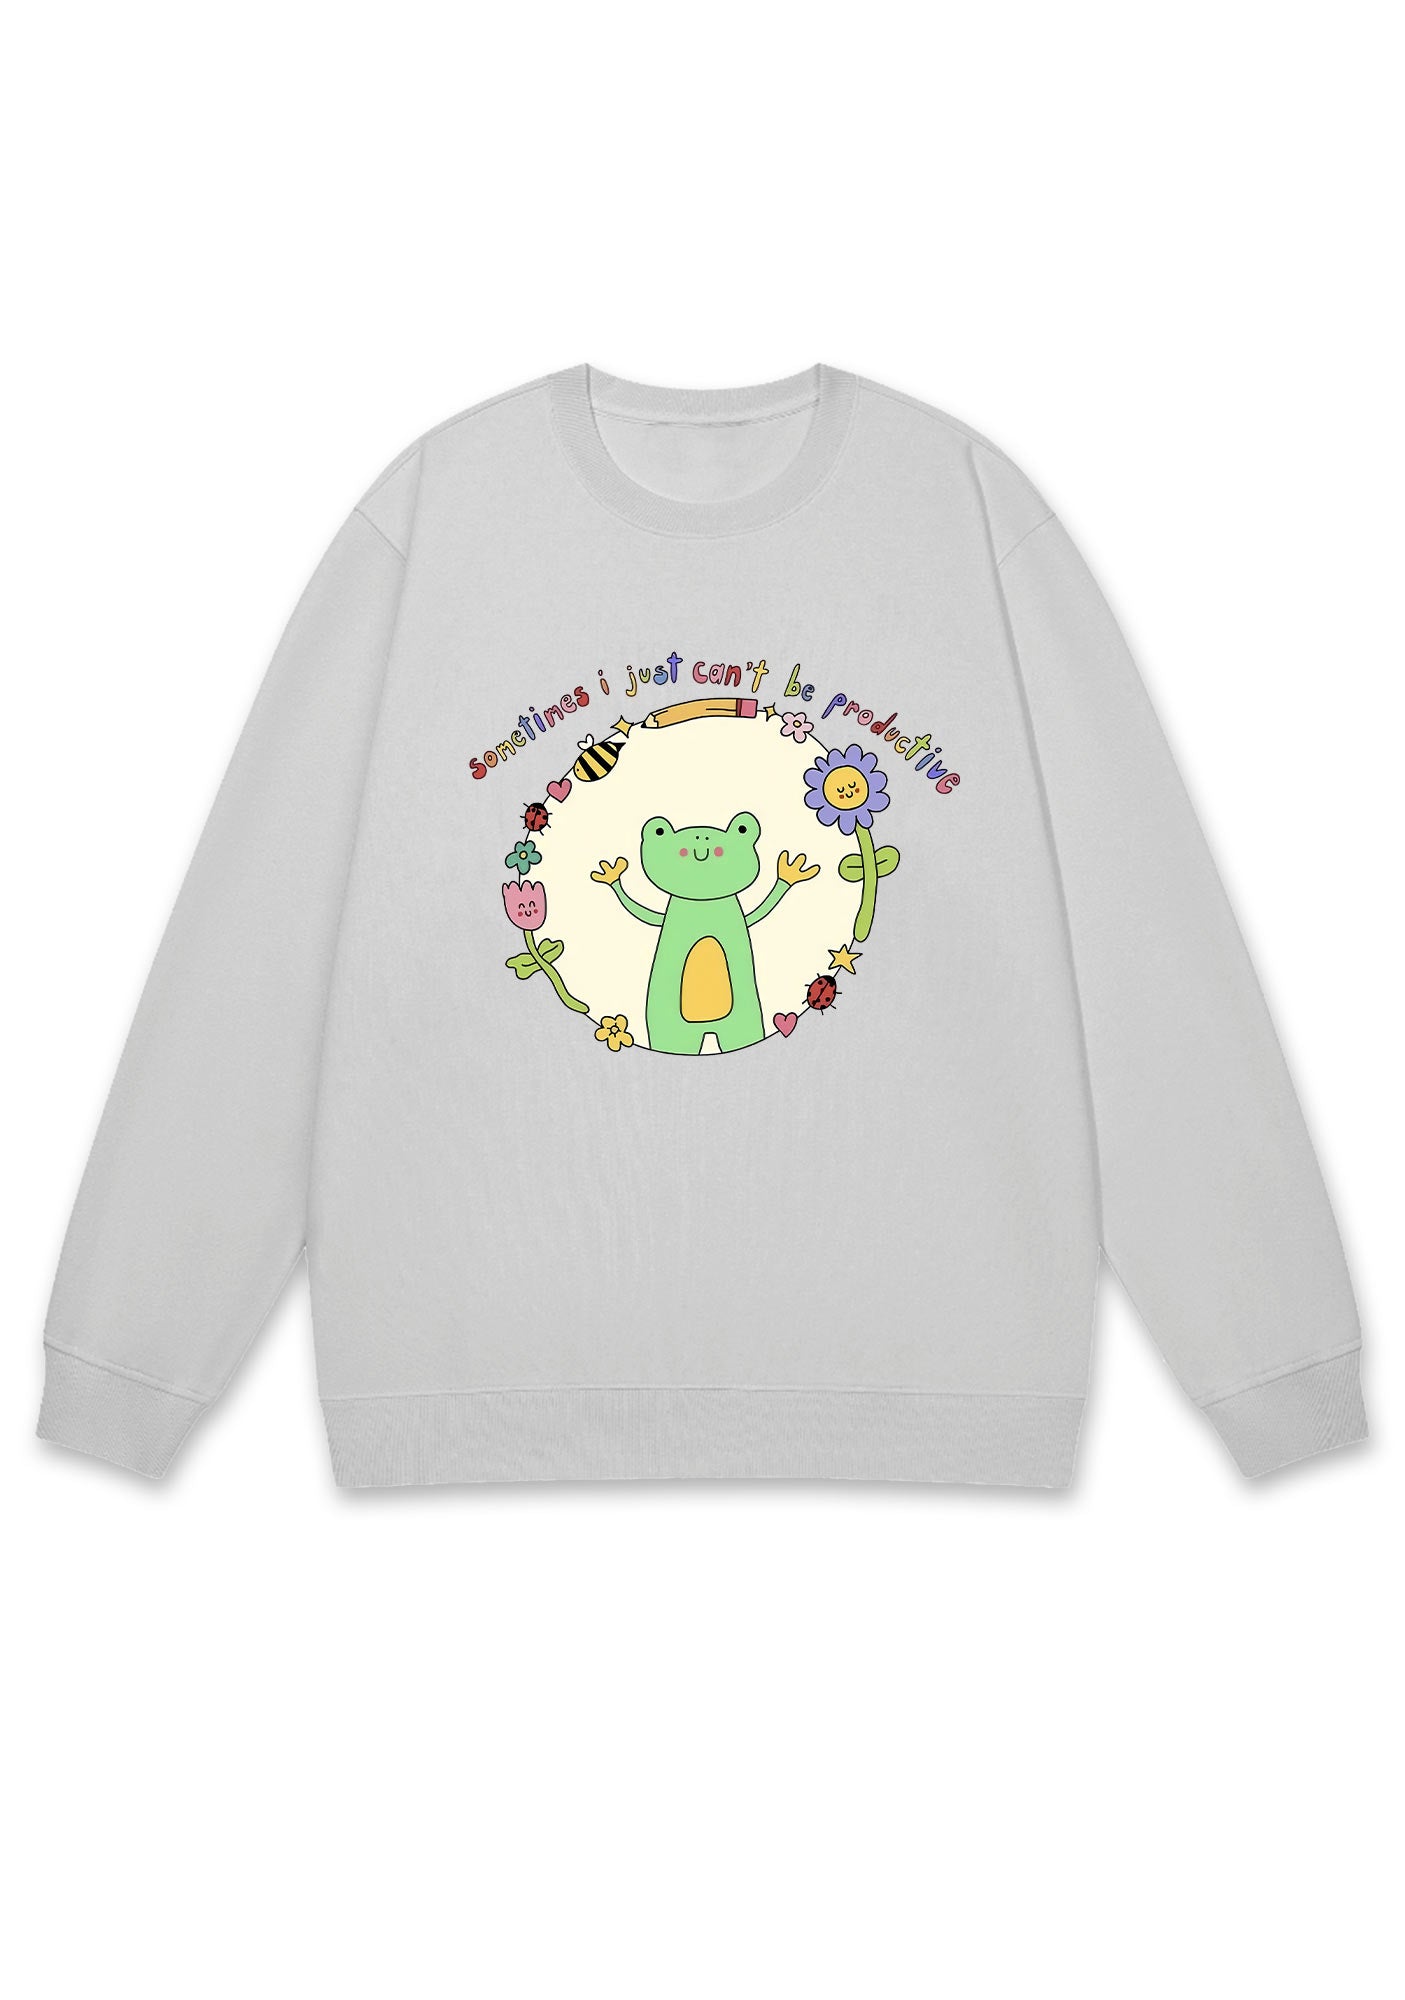 I Just Can't Be Productive Y2K Sweatshirt